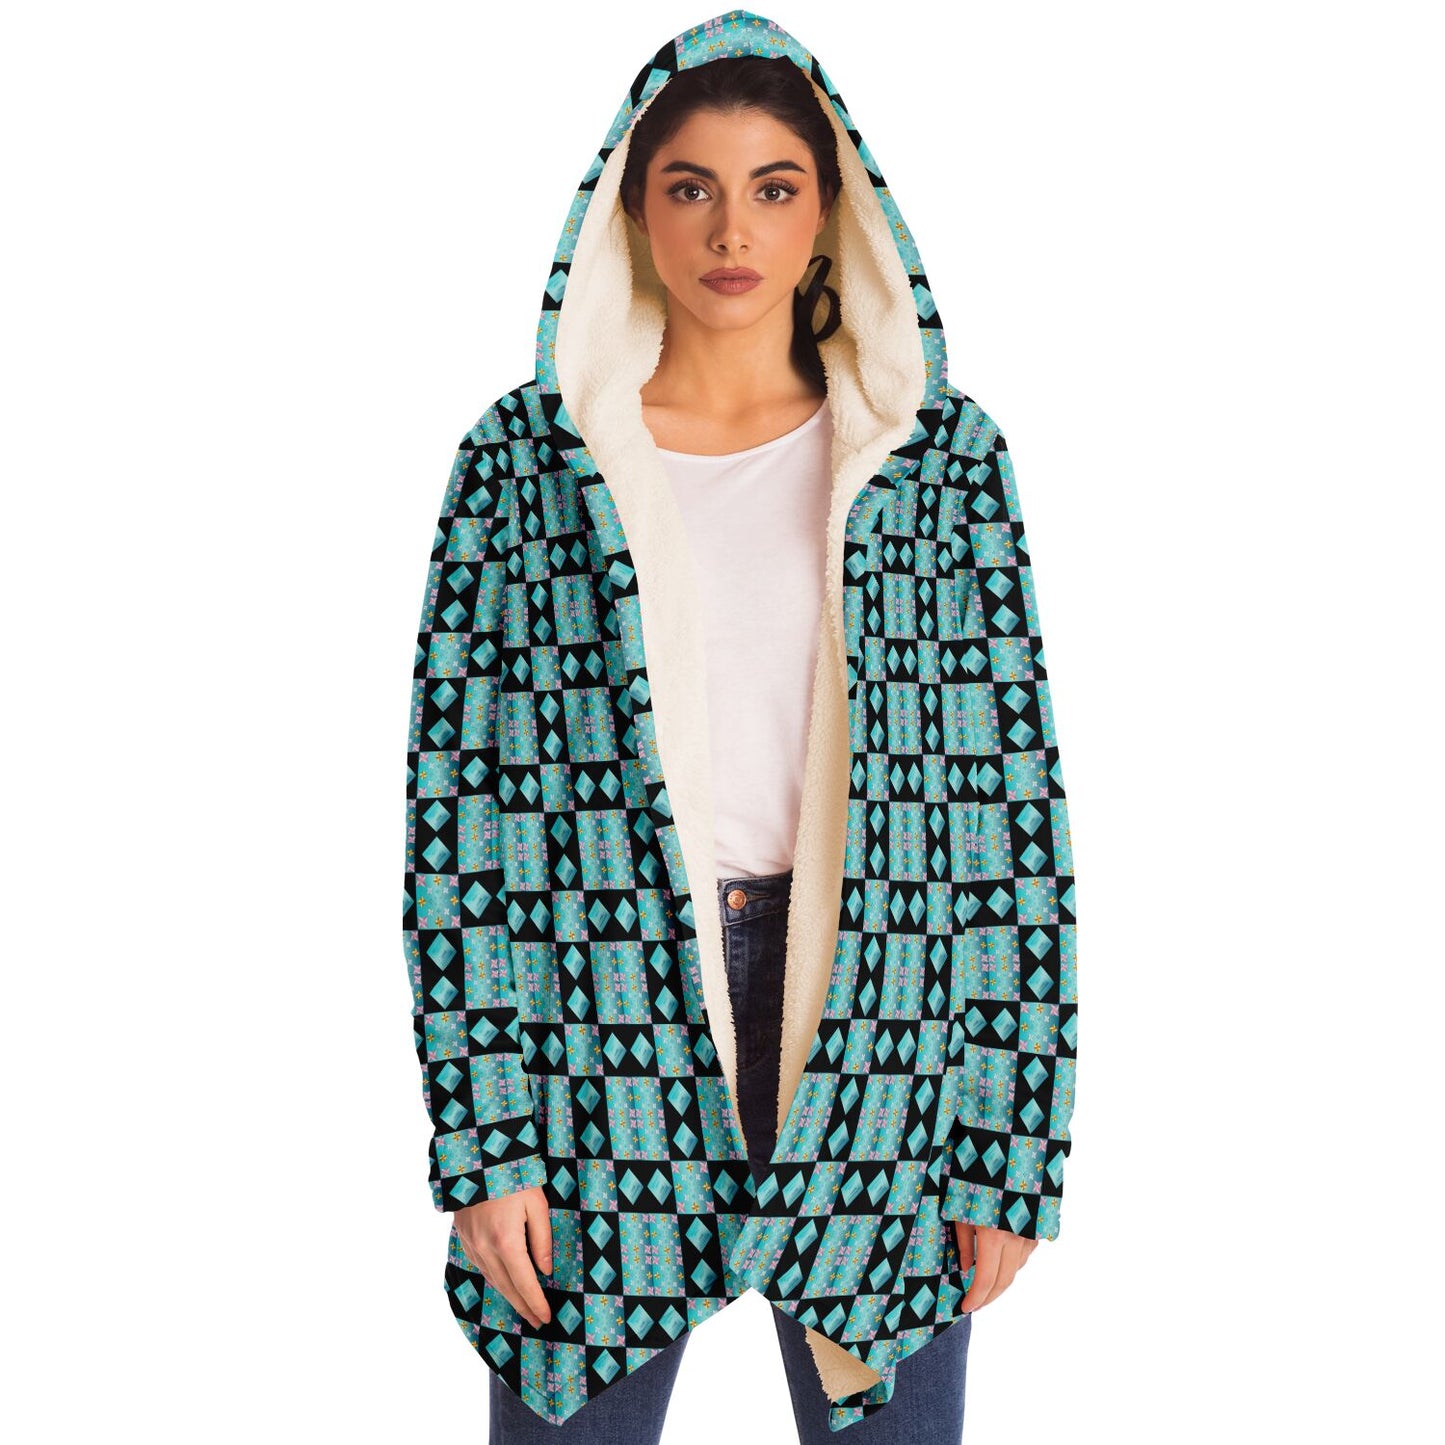 Microfleece Cloak - AOP Kukloso Whimsical No 45 Abstract shapes on a Turquoise bkgd. - Free Shipping - Free Shipping